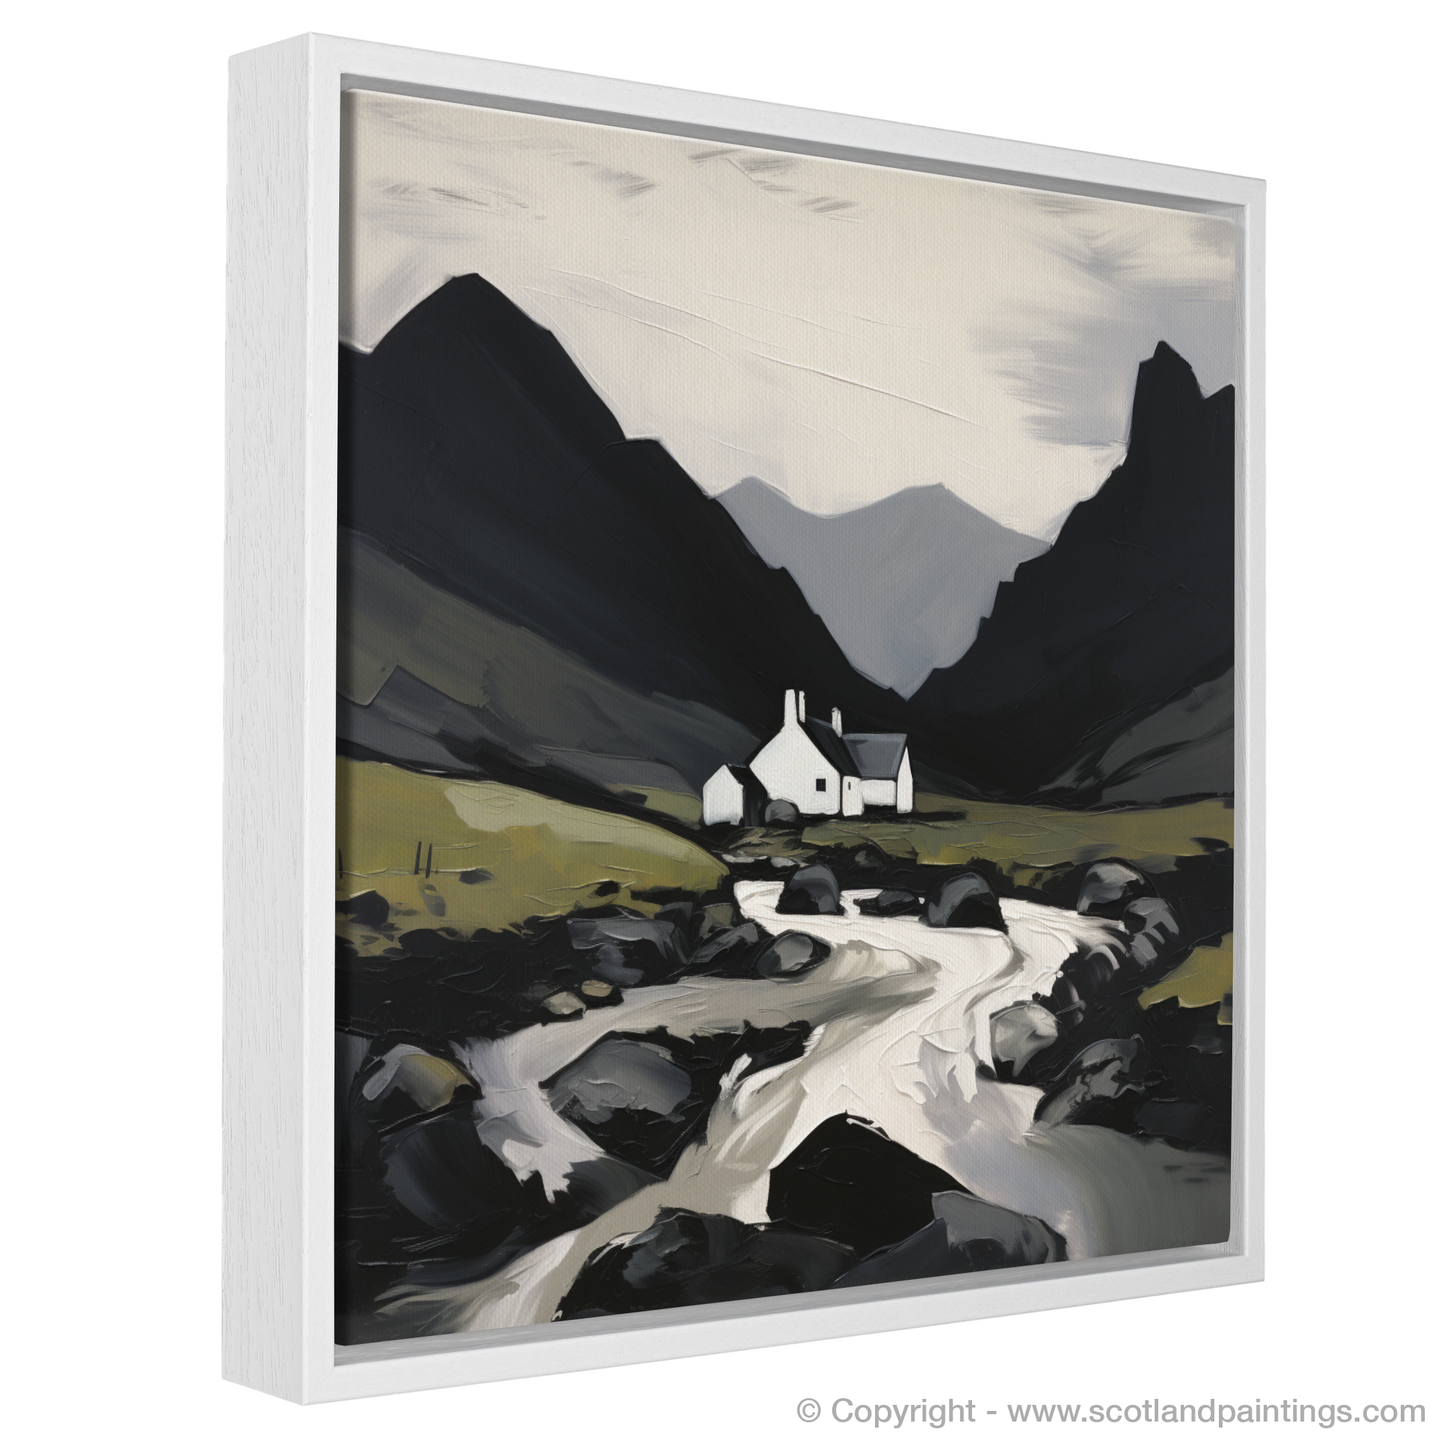 Painting and Art Print of Càrn Aosda entitled "Majesty of Càrn Aosda: An Expressionist Homage to Scottish Munros".